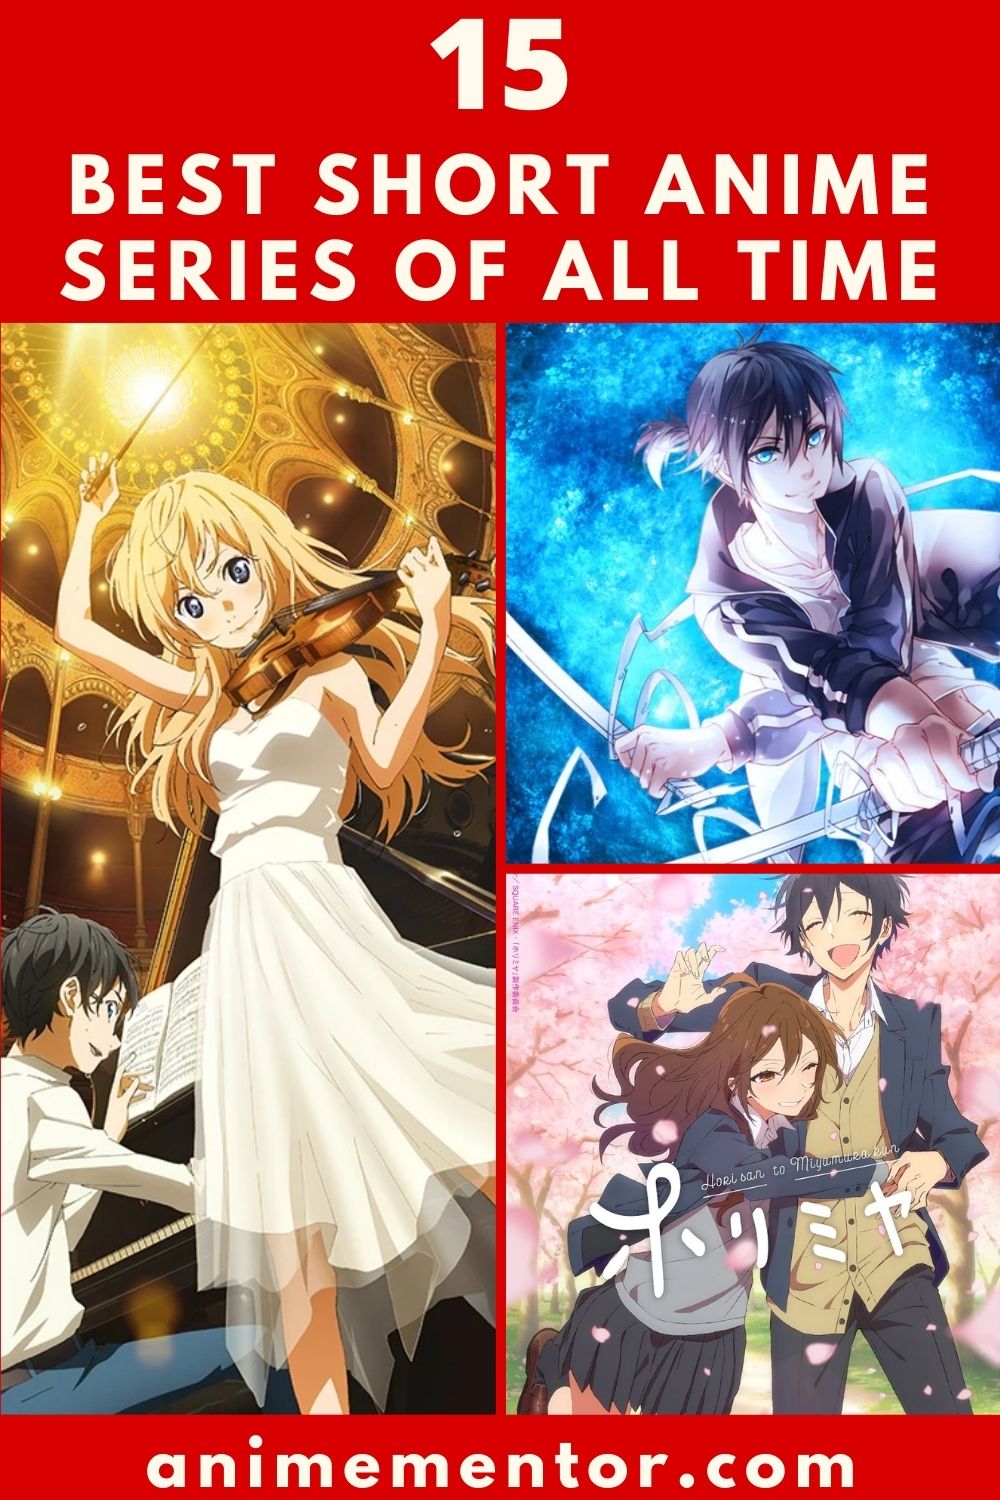 15 Best Short Anime Series of All Time